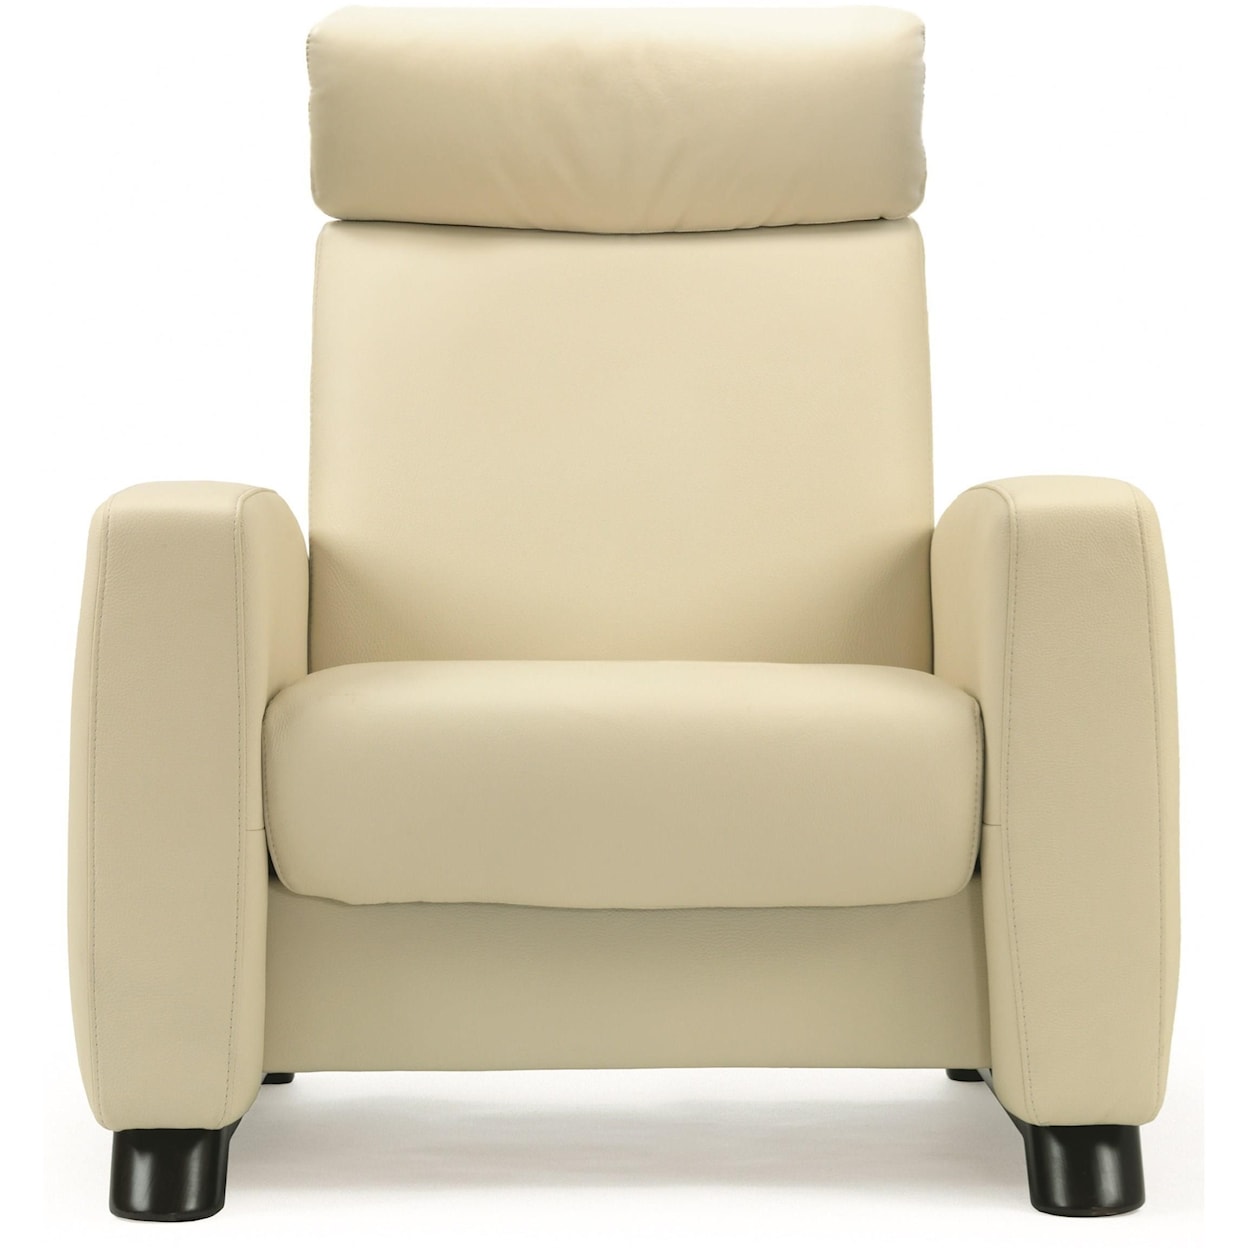 Stressless by Ekornes Arion 19 - A10 High-Back Reclining Chair